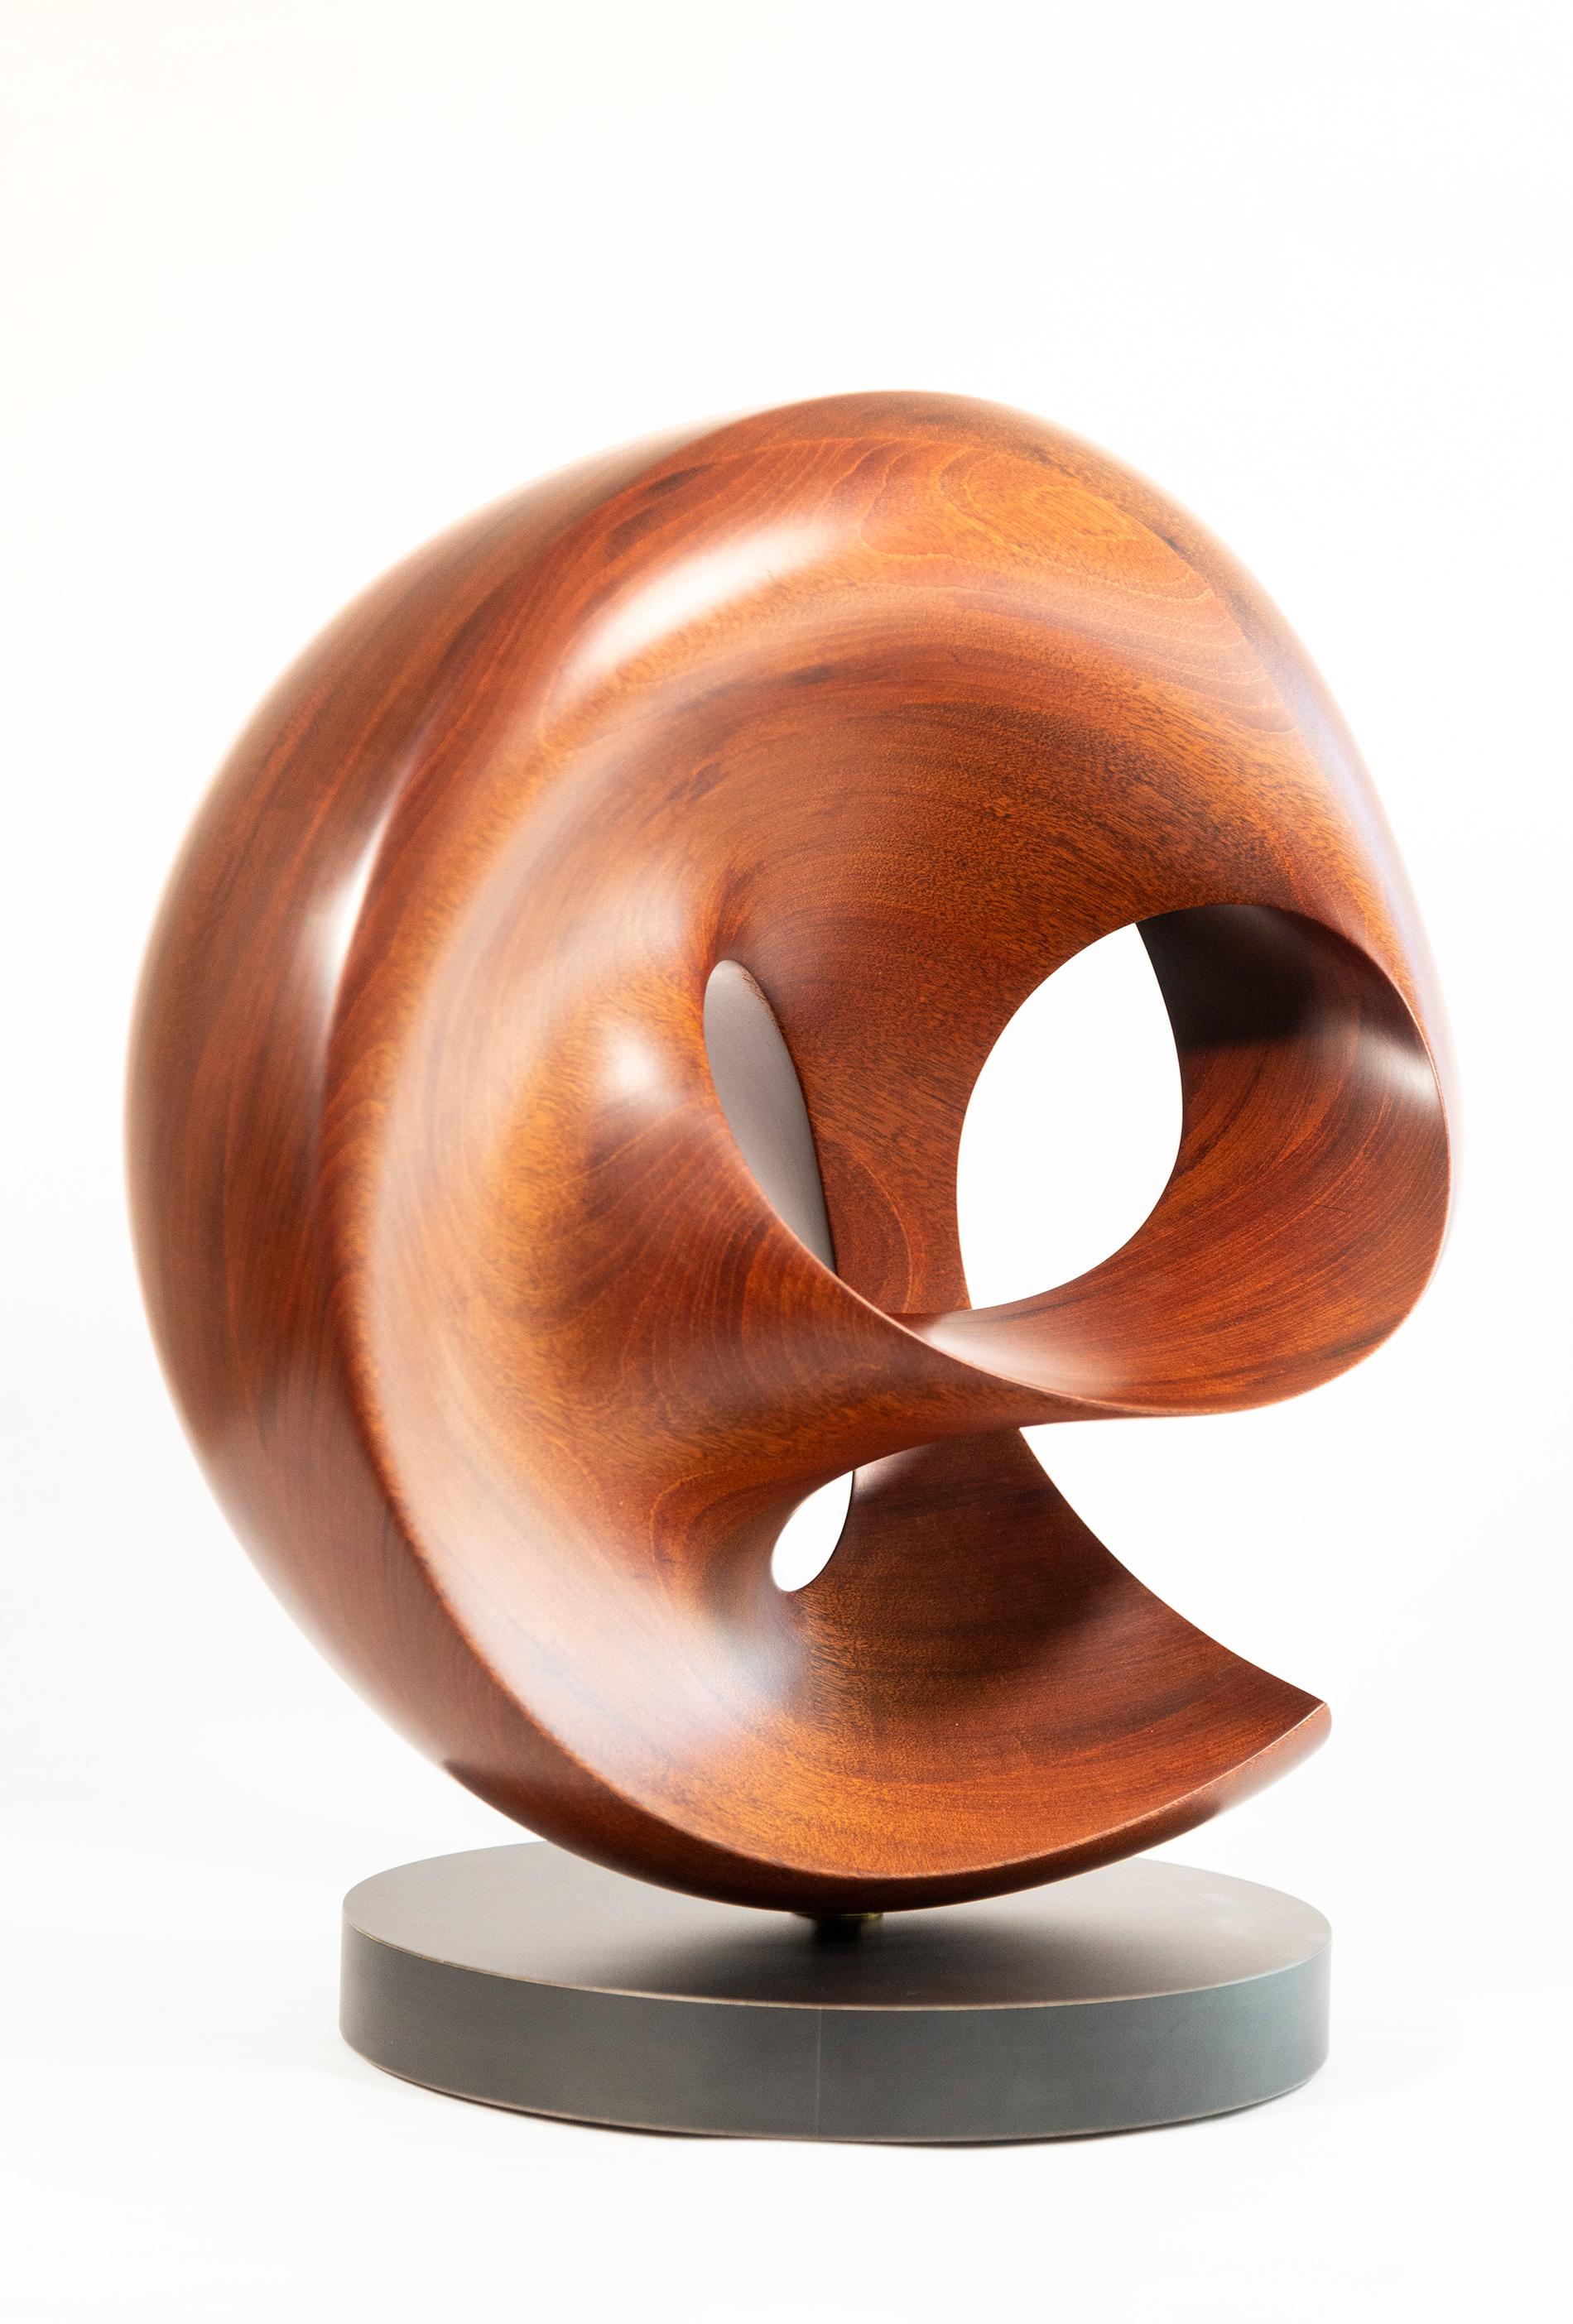 Fanfare - smooth, polished, abstract, contemporary, mahogany carved sculpture - Abstract Sculpture by David Chamberlain